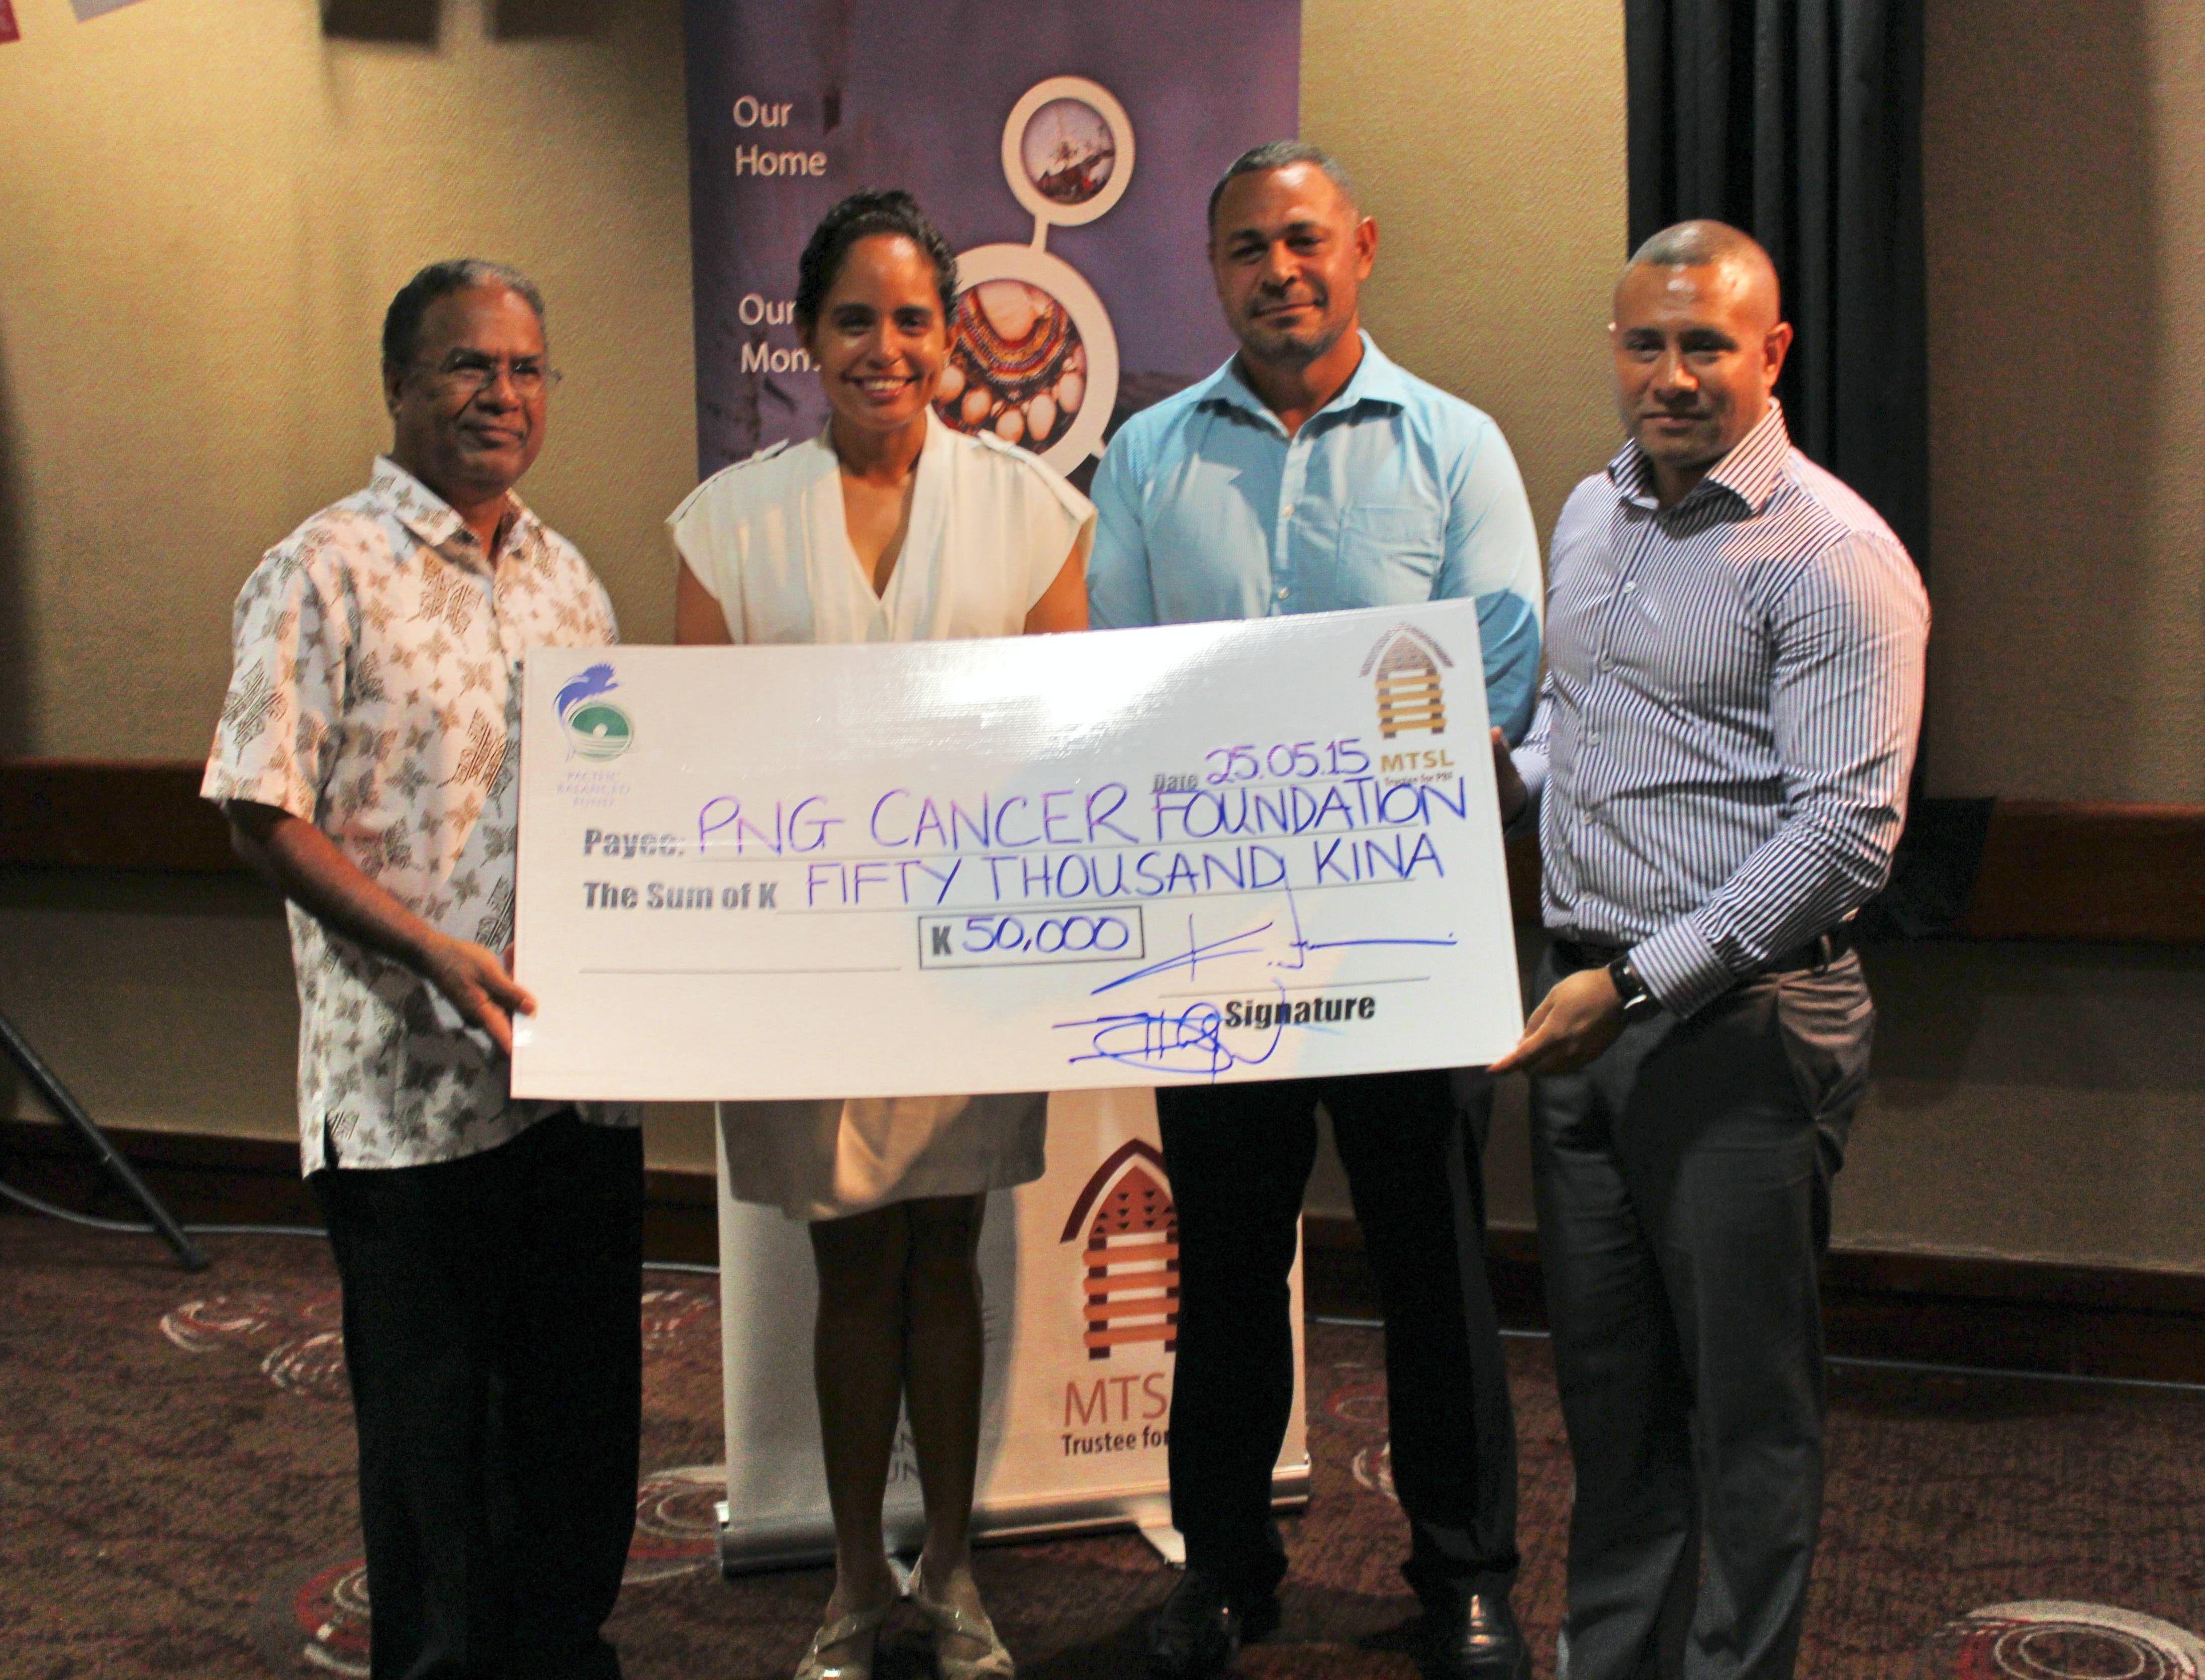 PACIFIC BALANCED FUND Donates K50,000 to PNG Cancer Foundation.